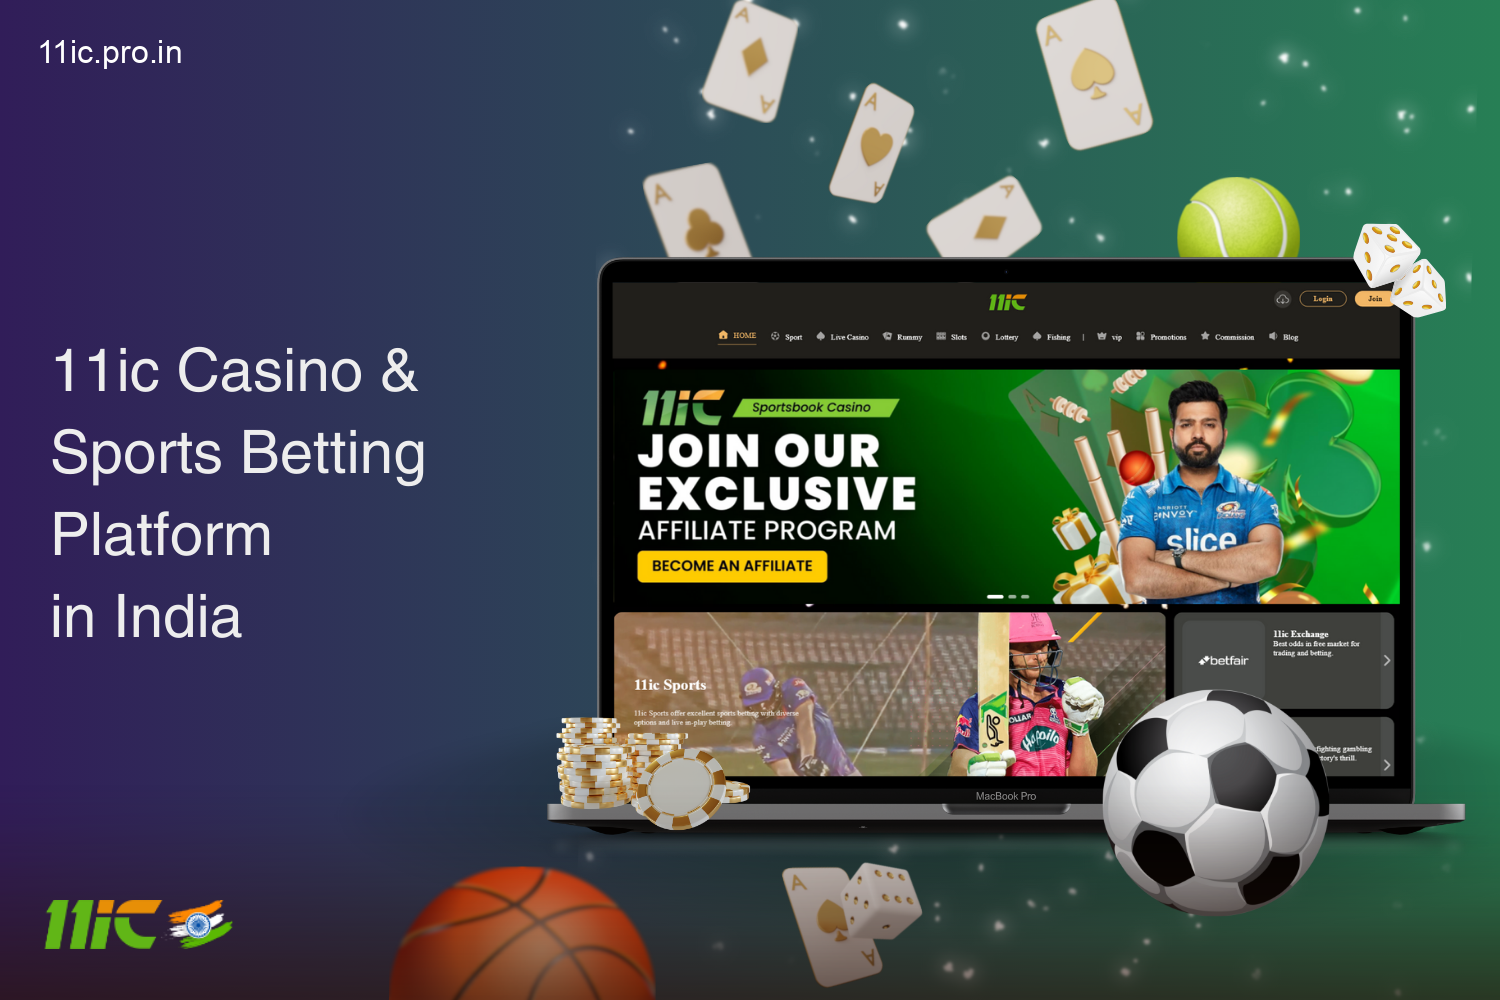 11ic platform for users from India with a large selection of casino games and sports betting